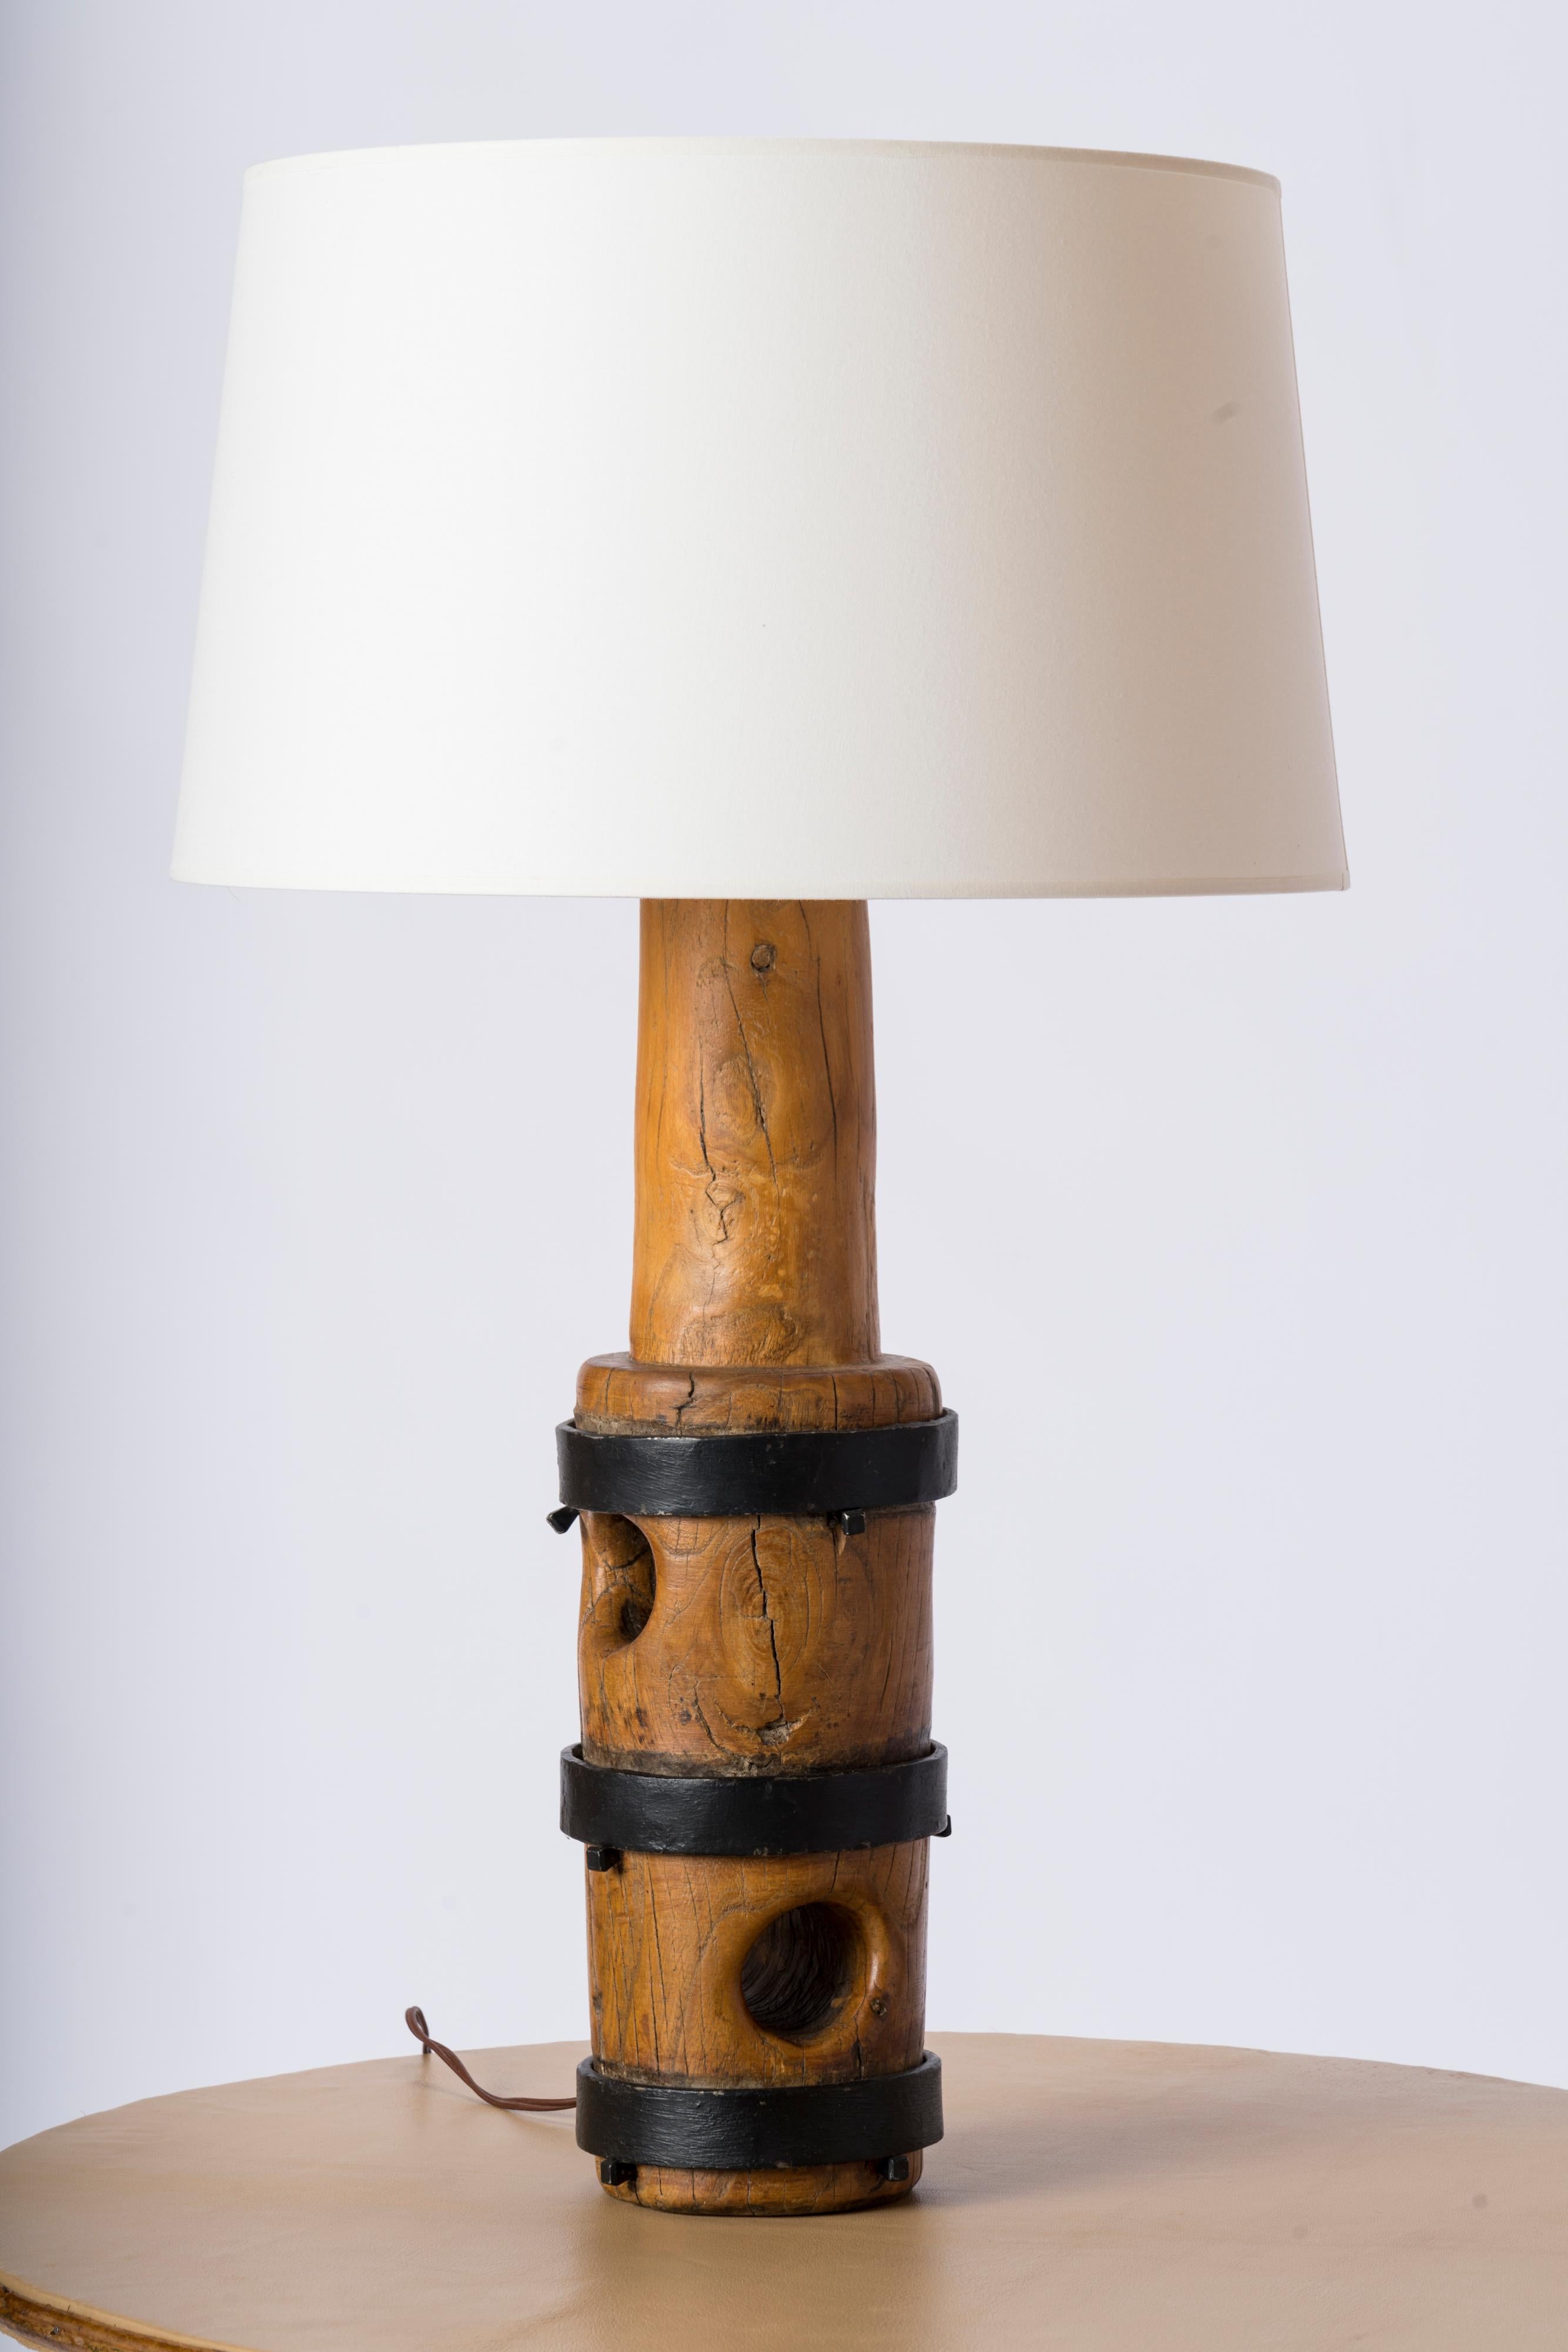 French Solid Oak & Wrought Iron Brutalist Table Lamp - France 1970s For Sale